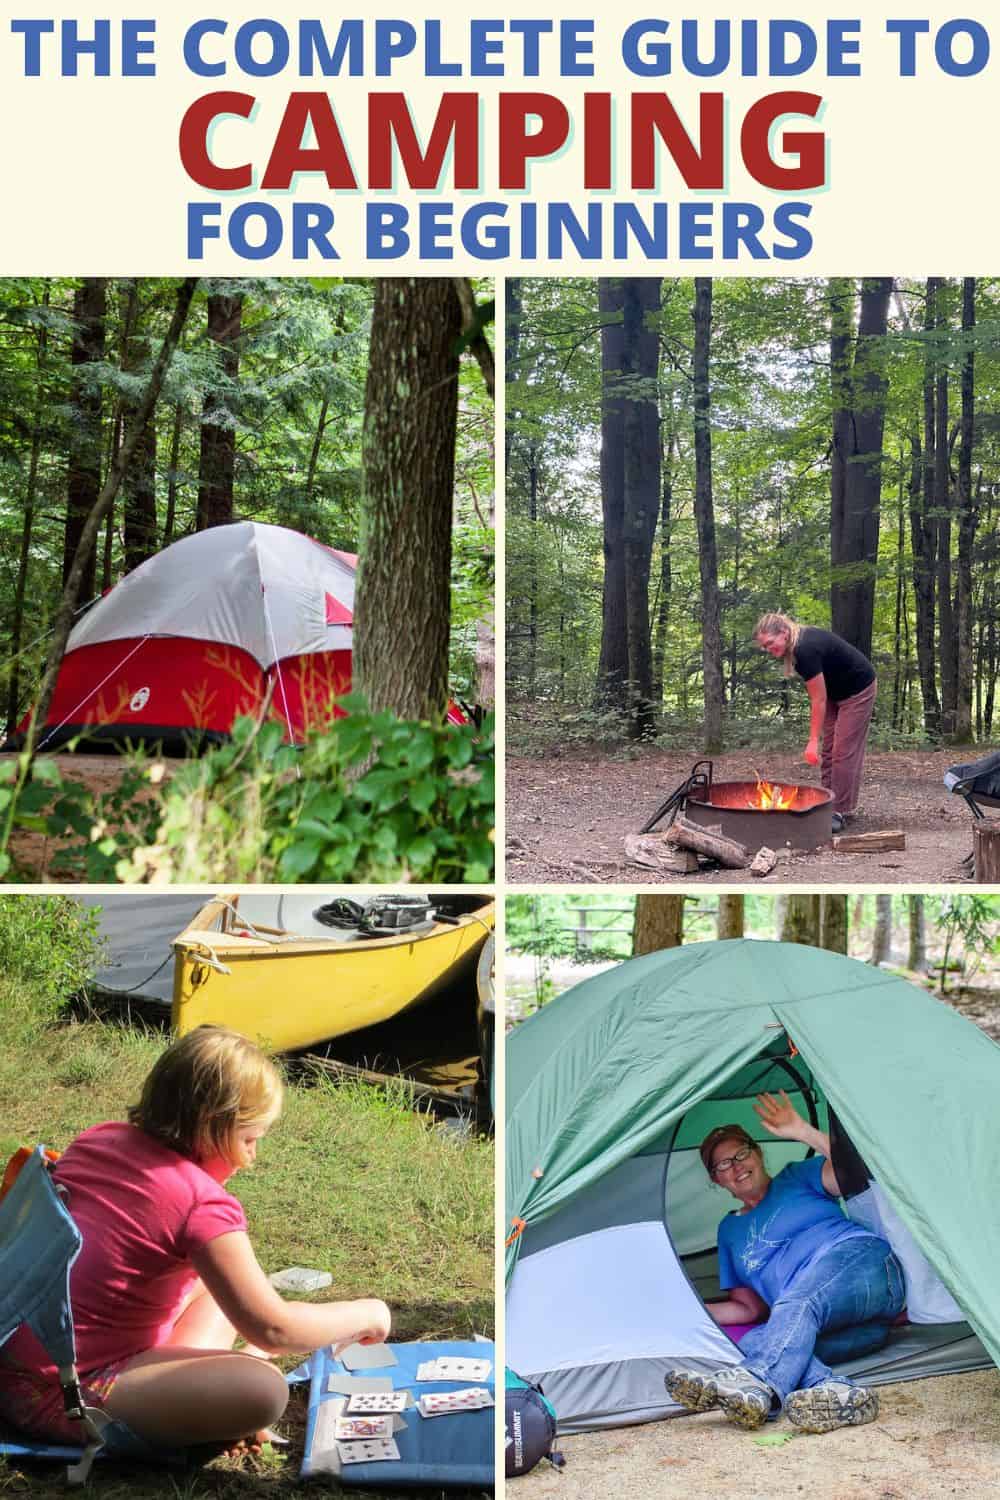 A collage of camping photos with text overlay: The Complete Guide to Camping for Beginners. 